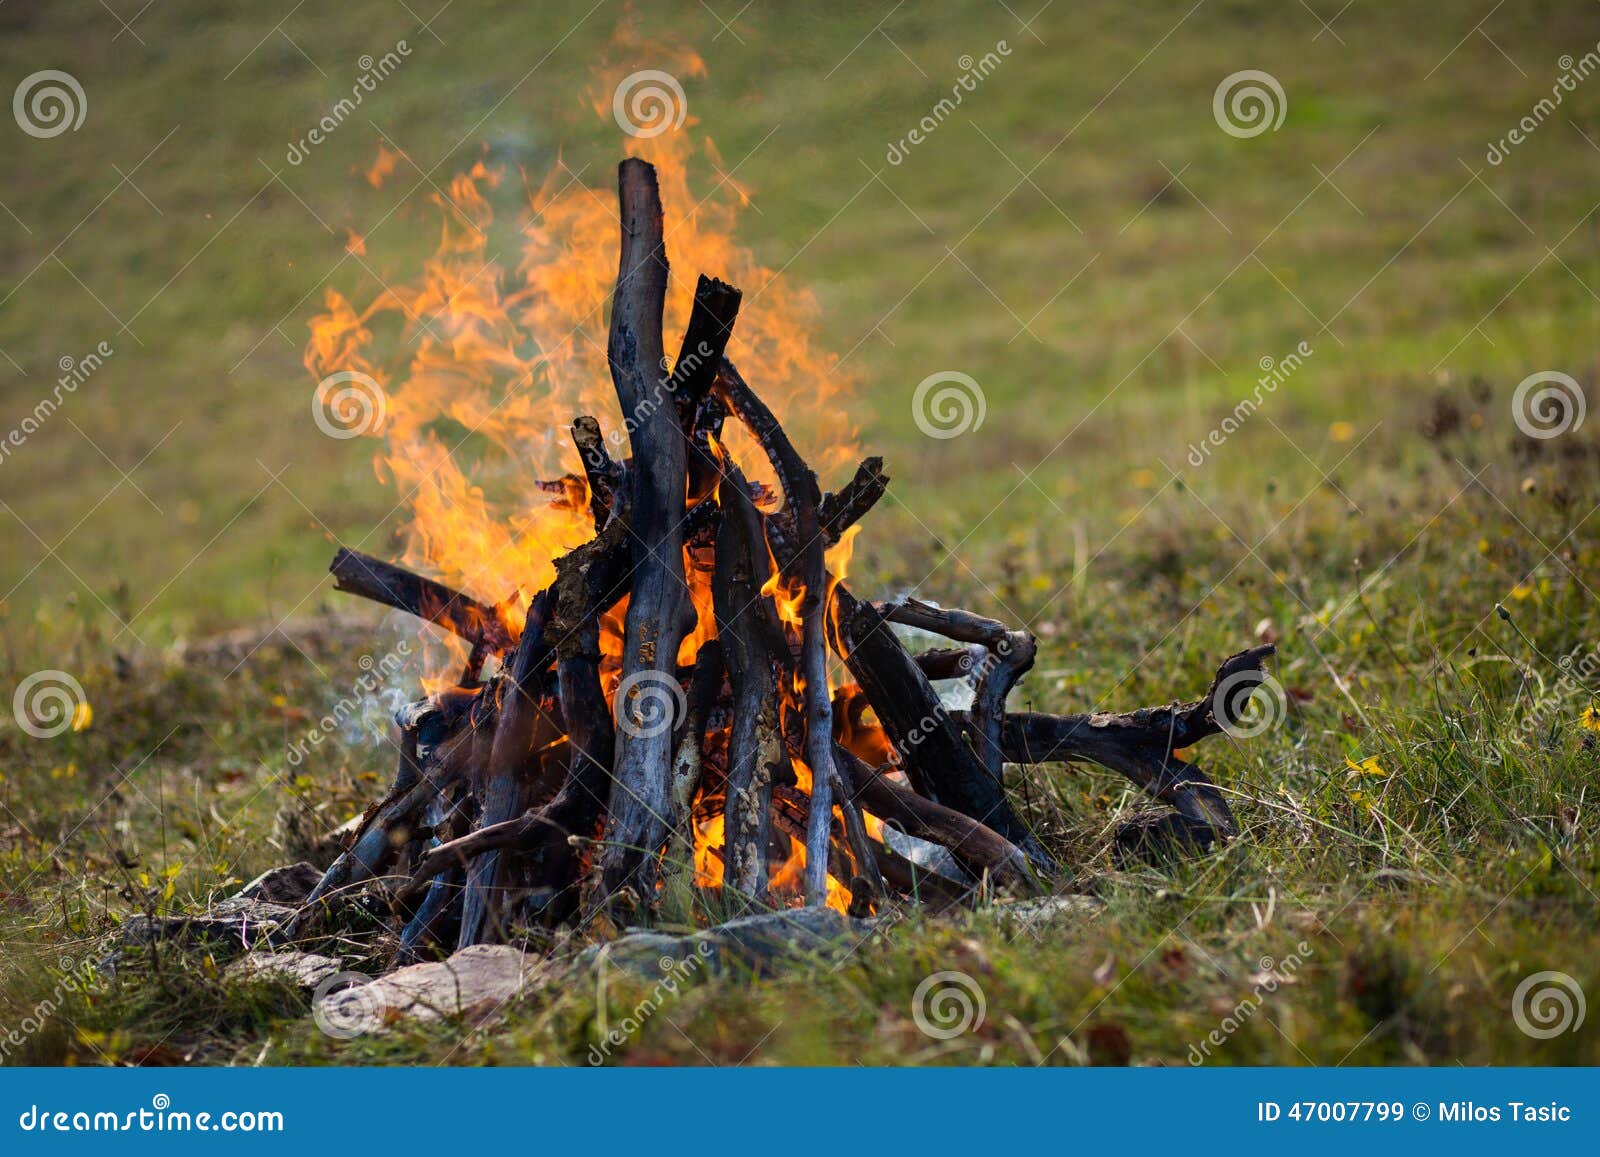 Camp fire stock image. Image of adventure, fiery, combustible - 47007799